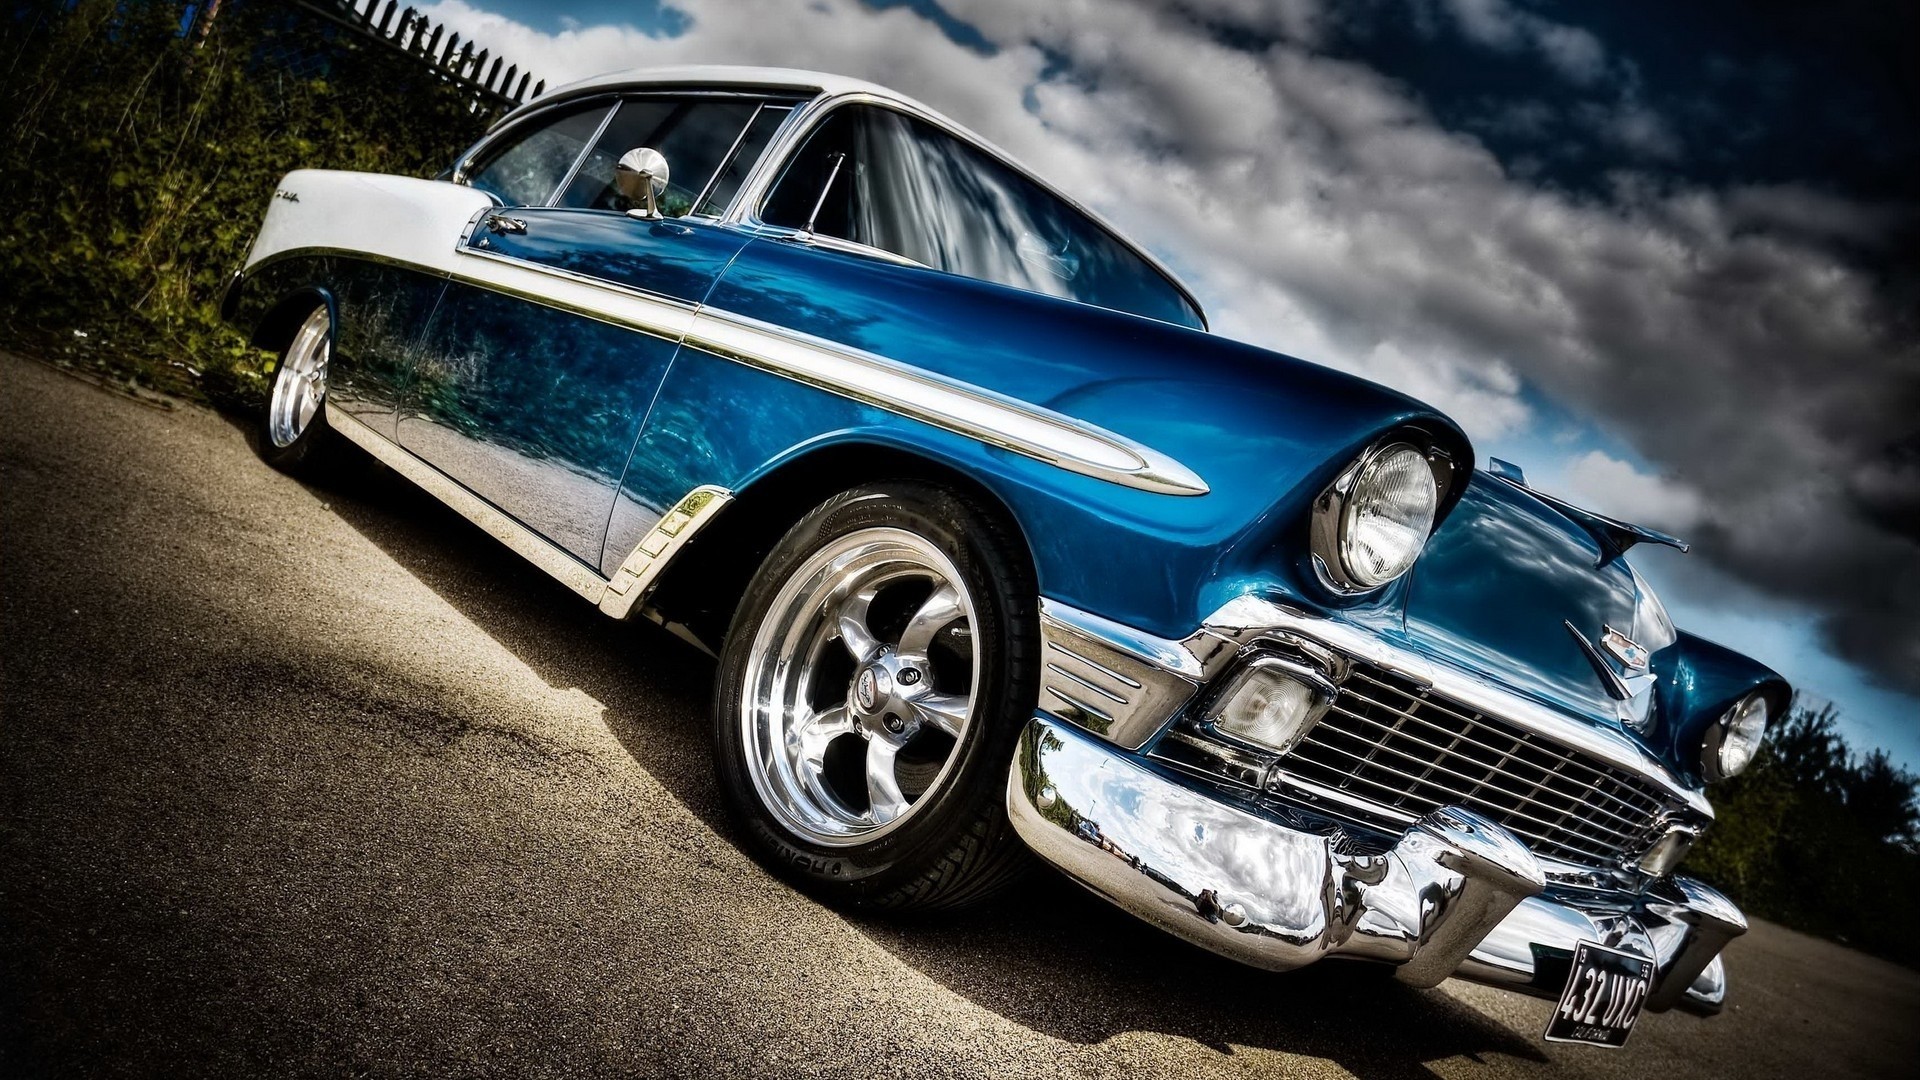 1920x1080 Chevrolet wallpapers chevy